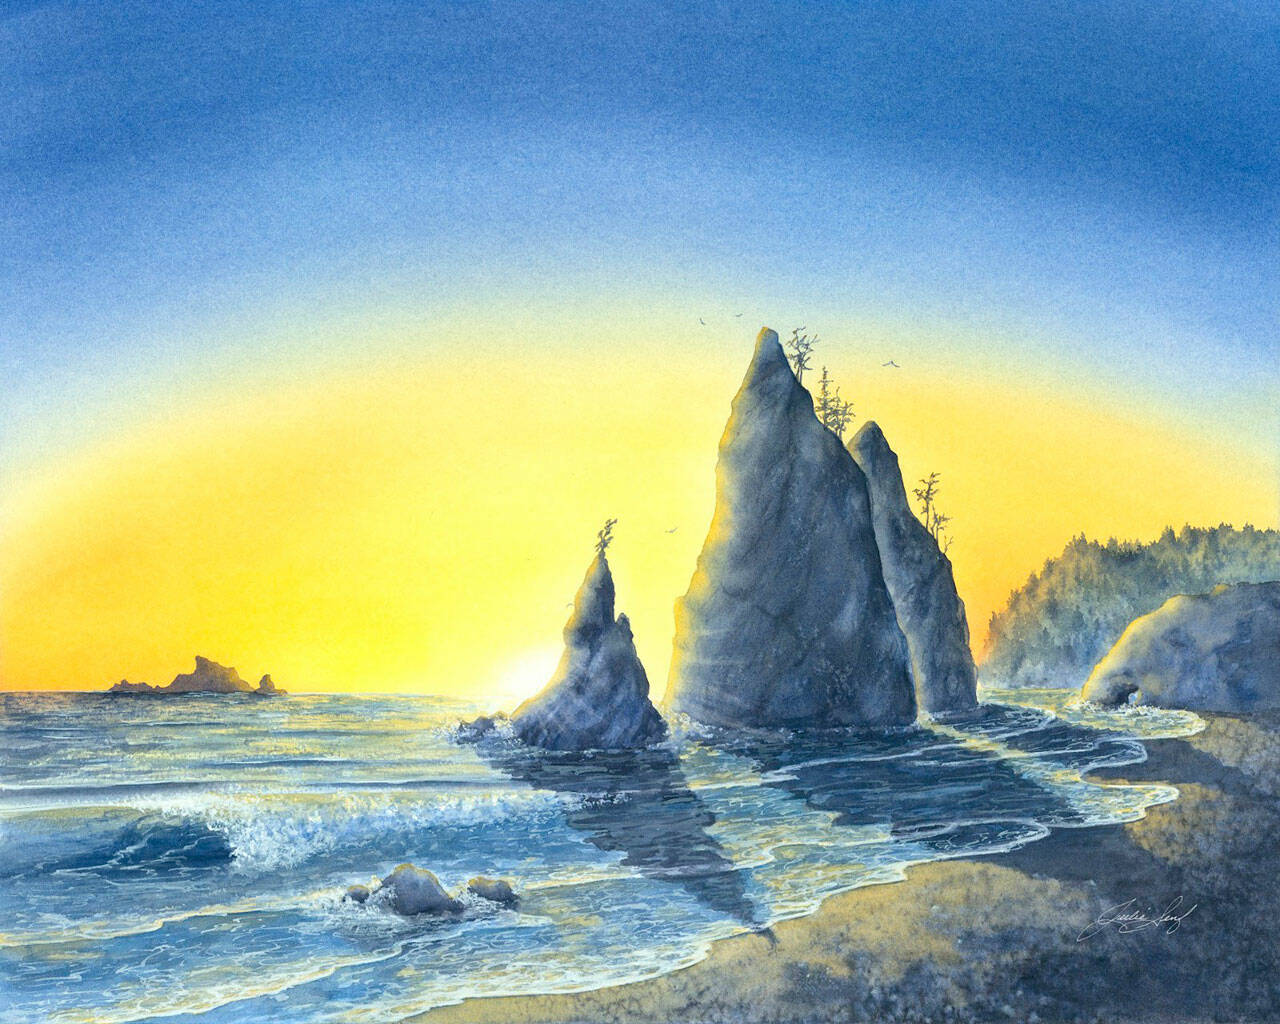 Rialto Beach by Julie Senf, a featured artist at the Blue Whole Gallery in December. Submitted art